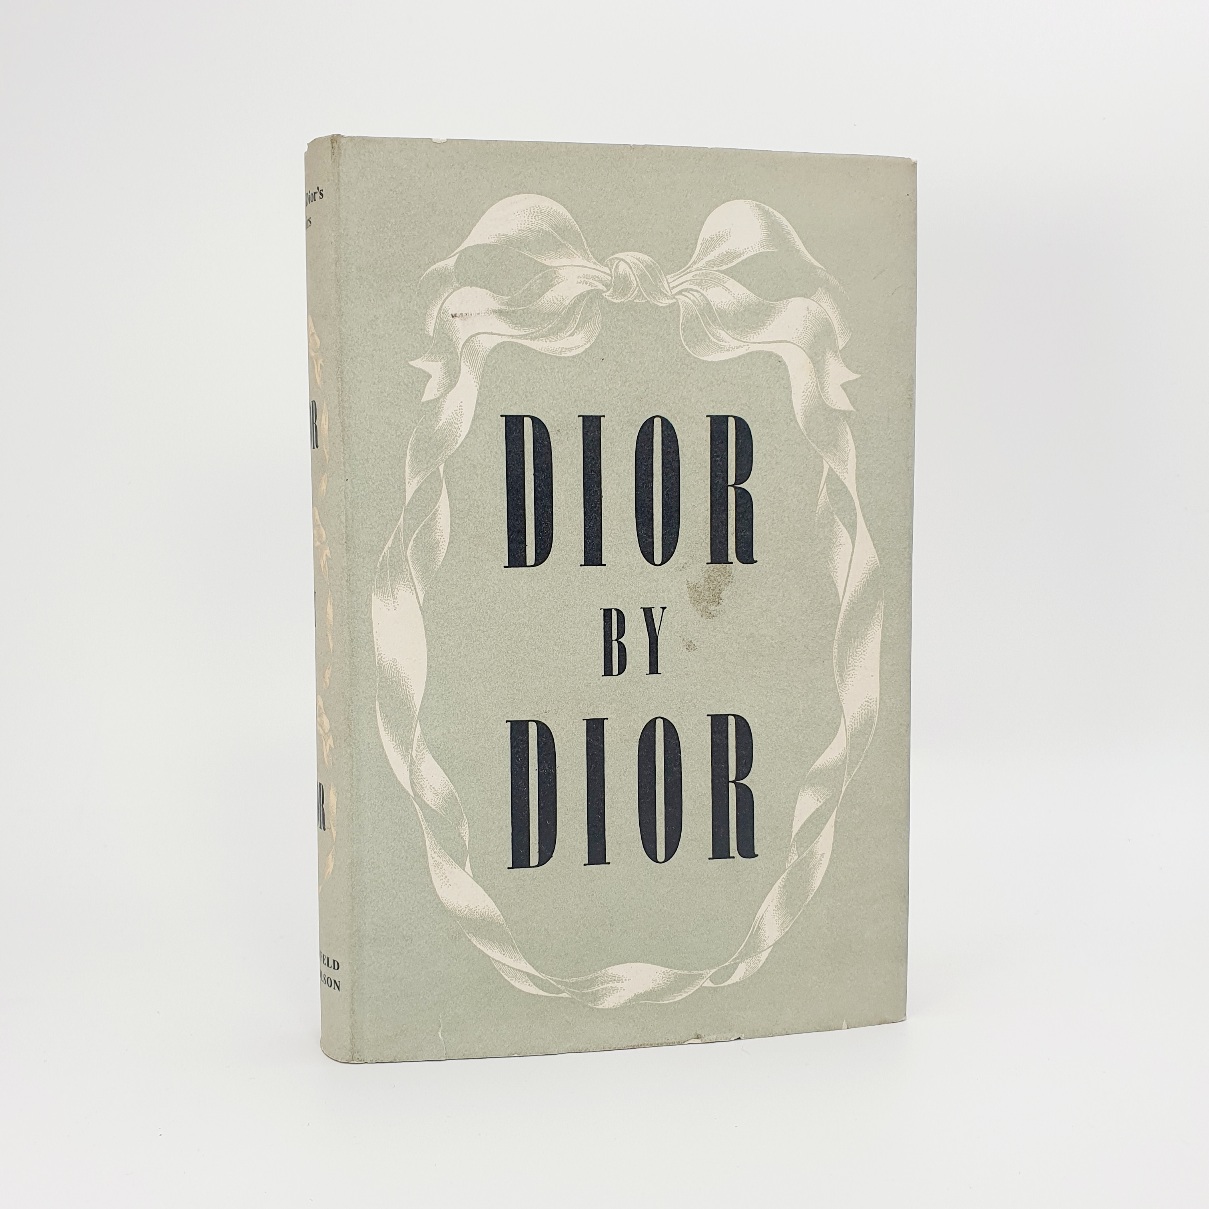 Dior by Dior. The Autobiography of Christian Dior